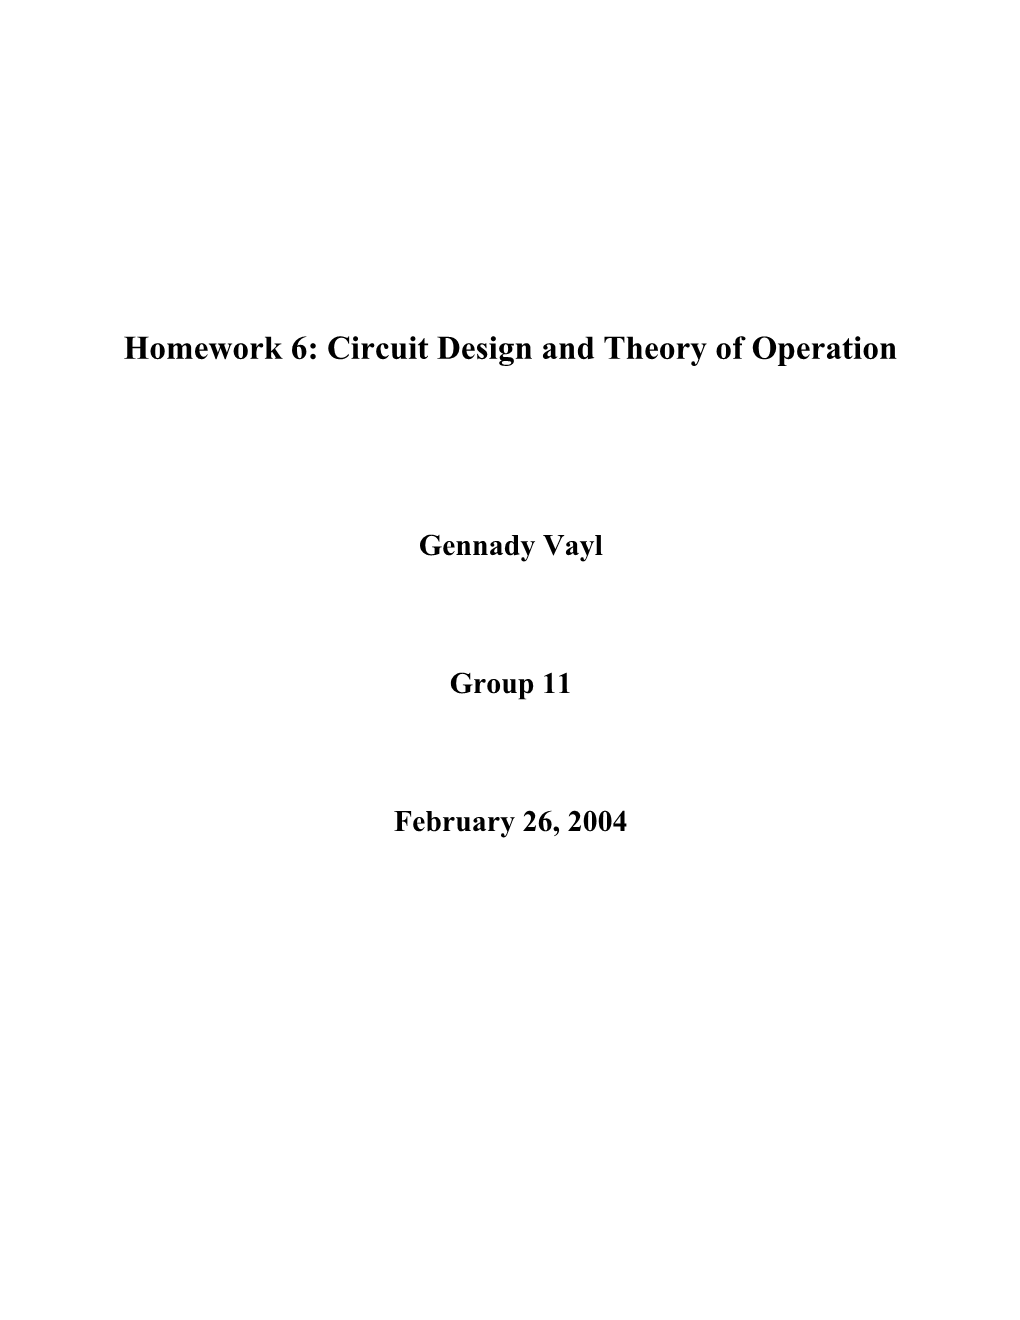 Homework 6: Circuit Design and Theory of Operation